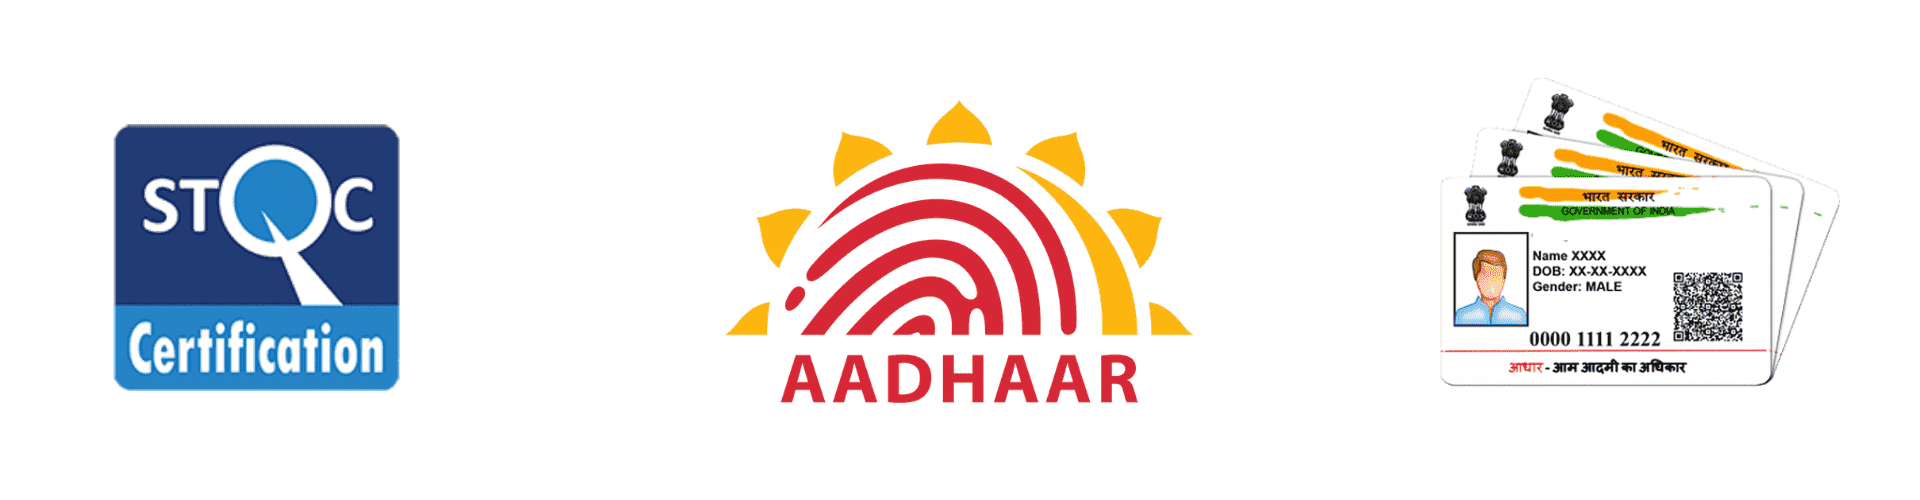 Everything You Need to Know About the Aadhaar Case Before the SC Verdict